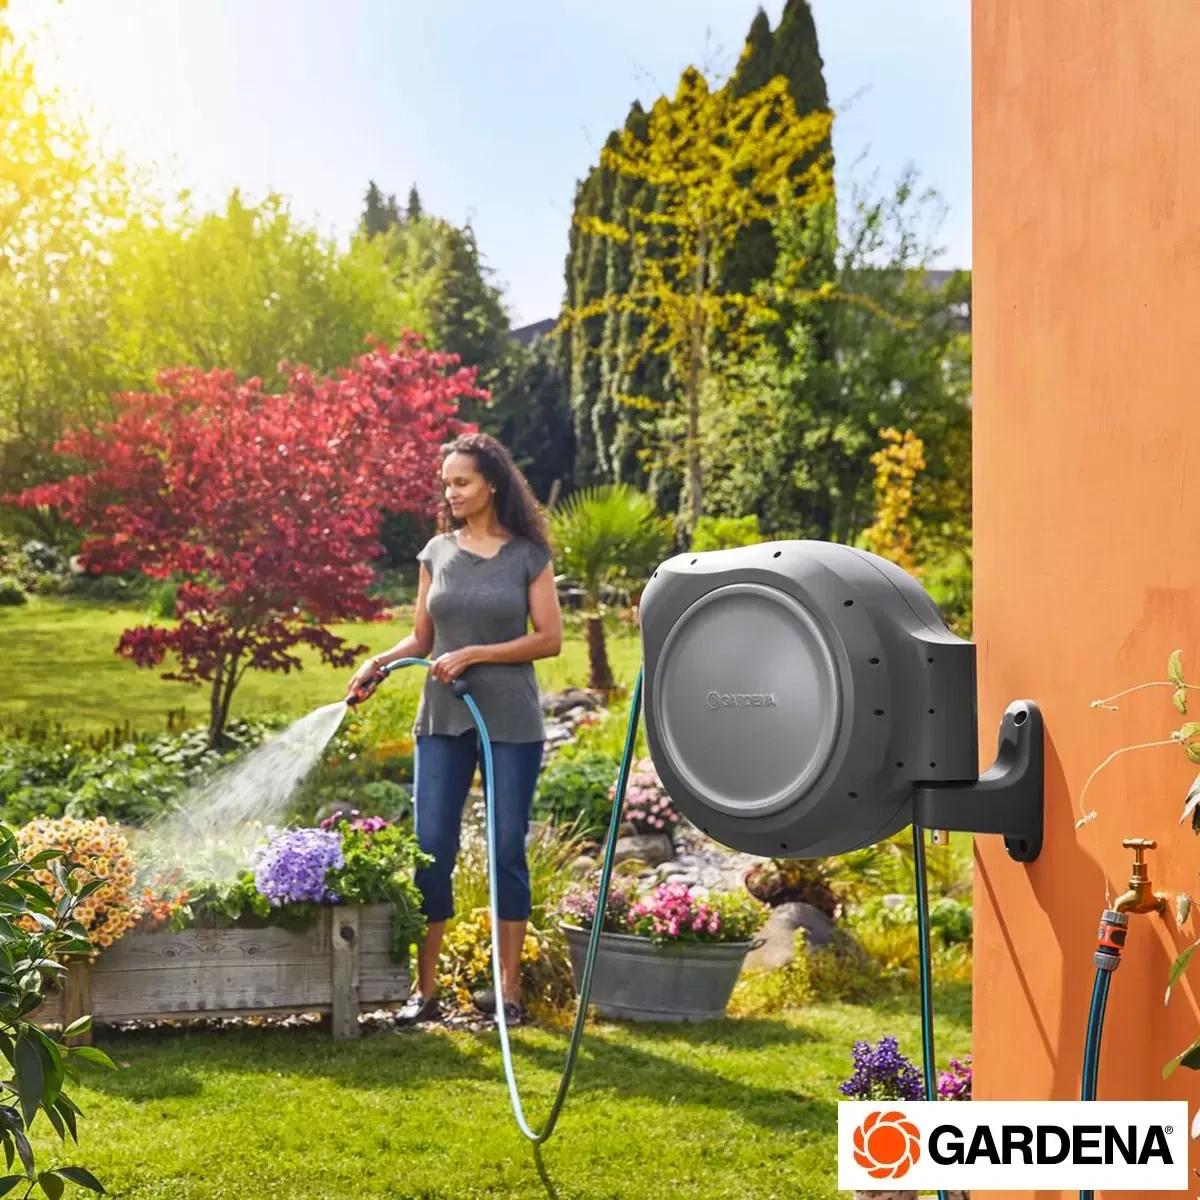 GARDENA Wall-Mounted 30m (98ft) Roll Up Hose Box & Hose with Automatic Roll-Up